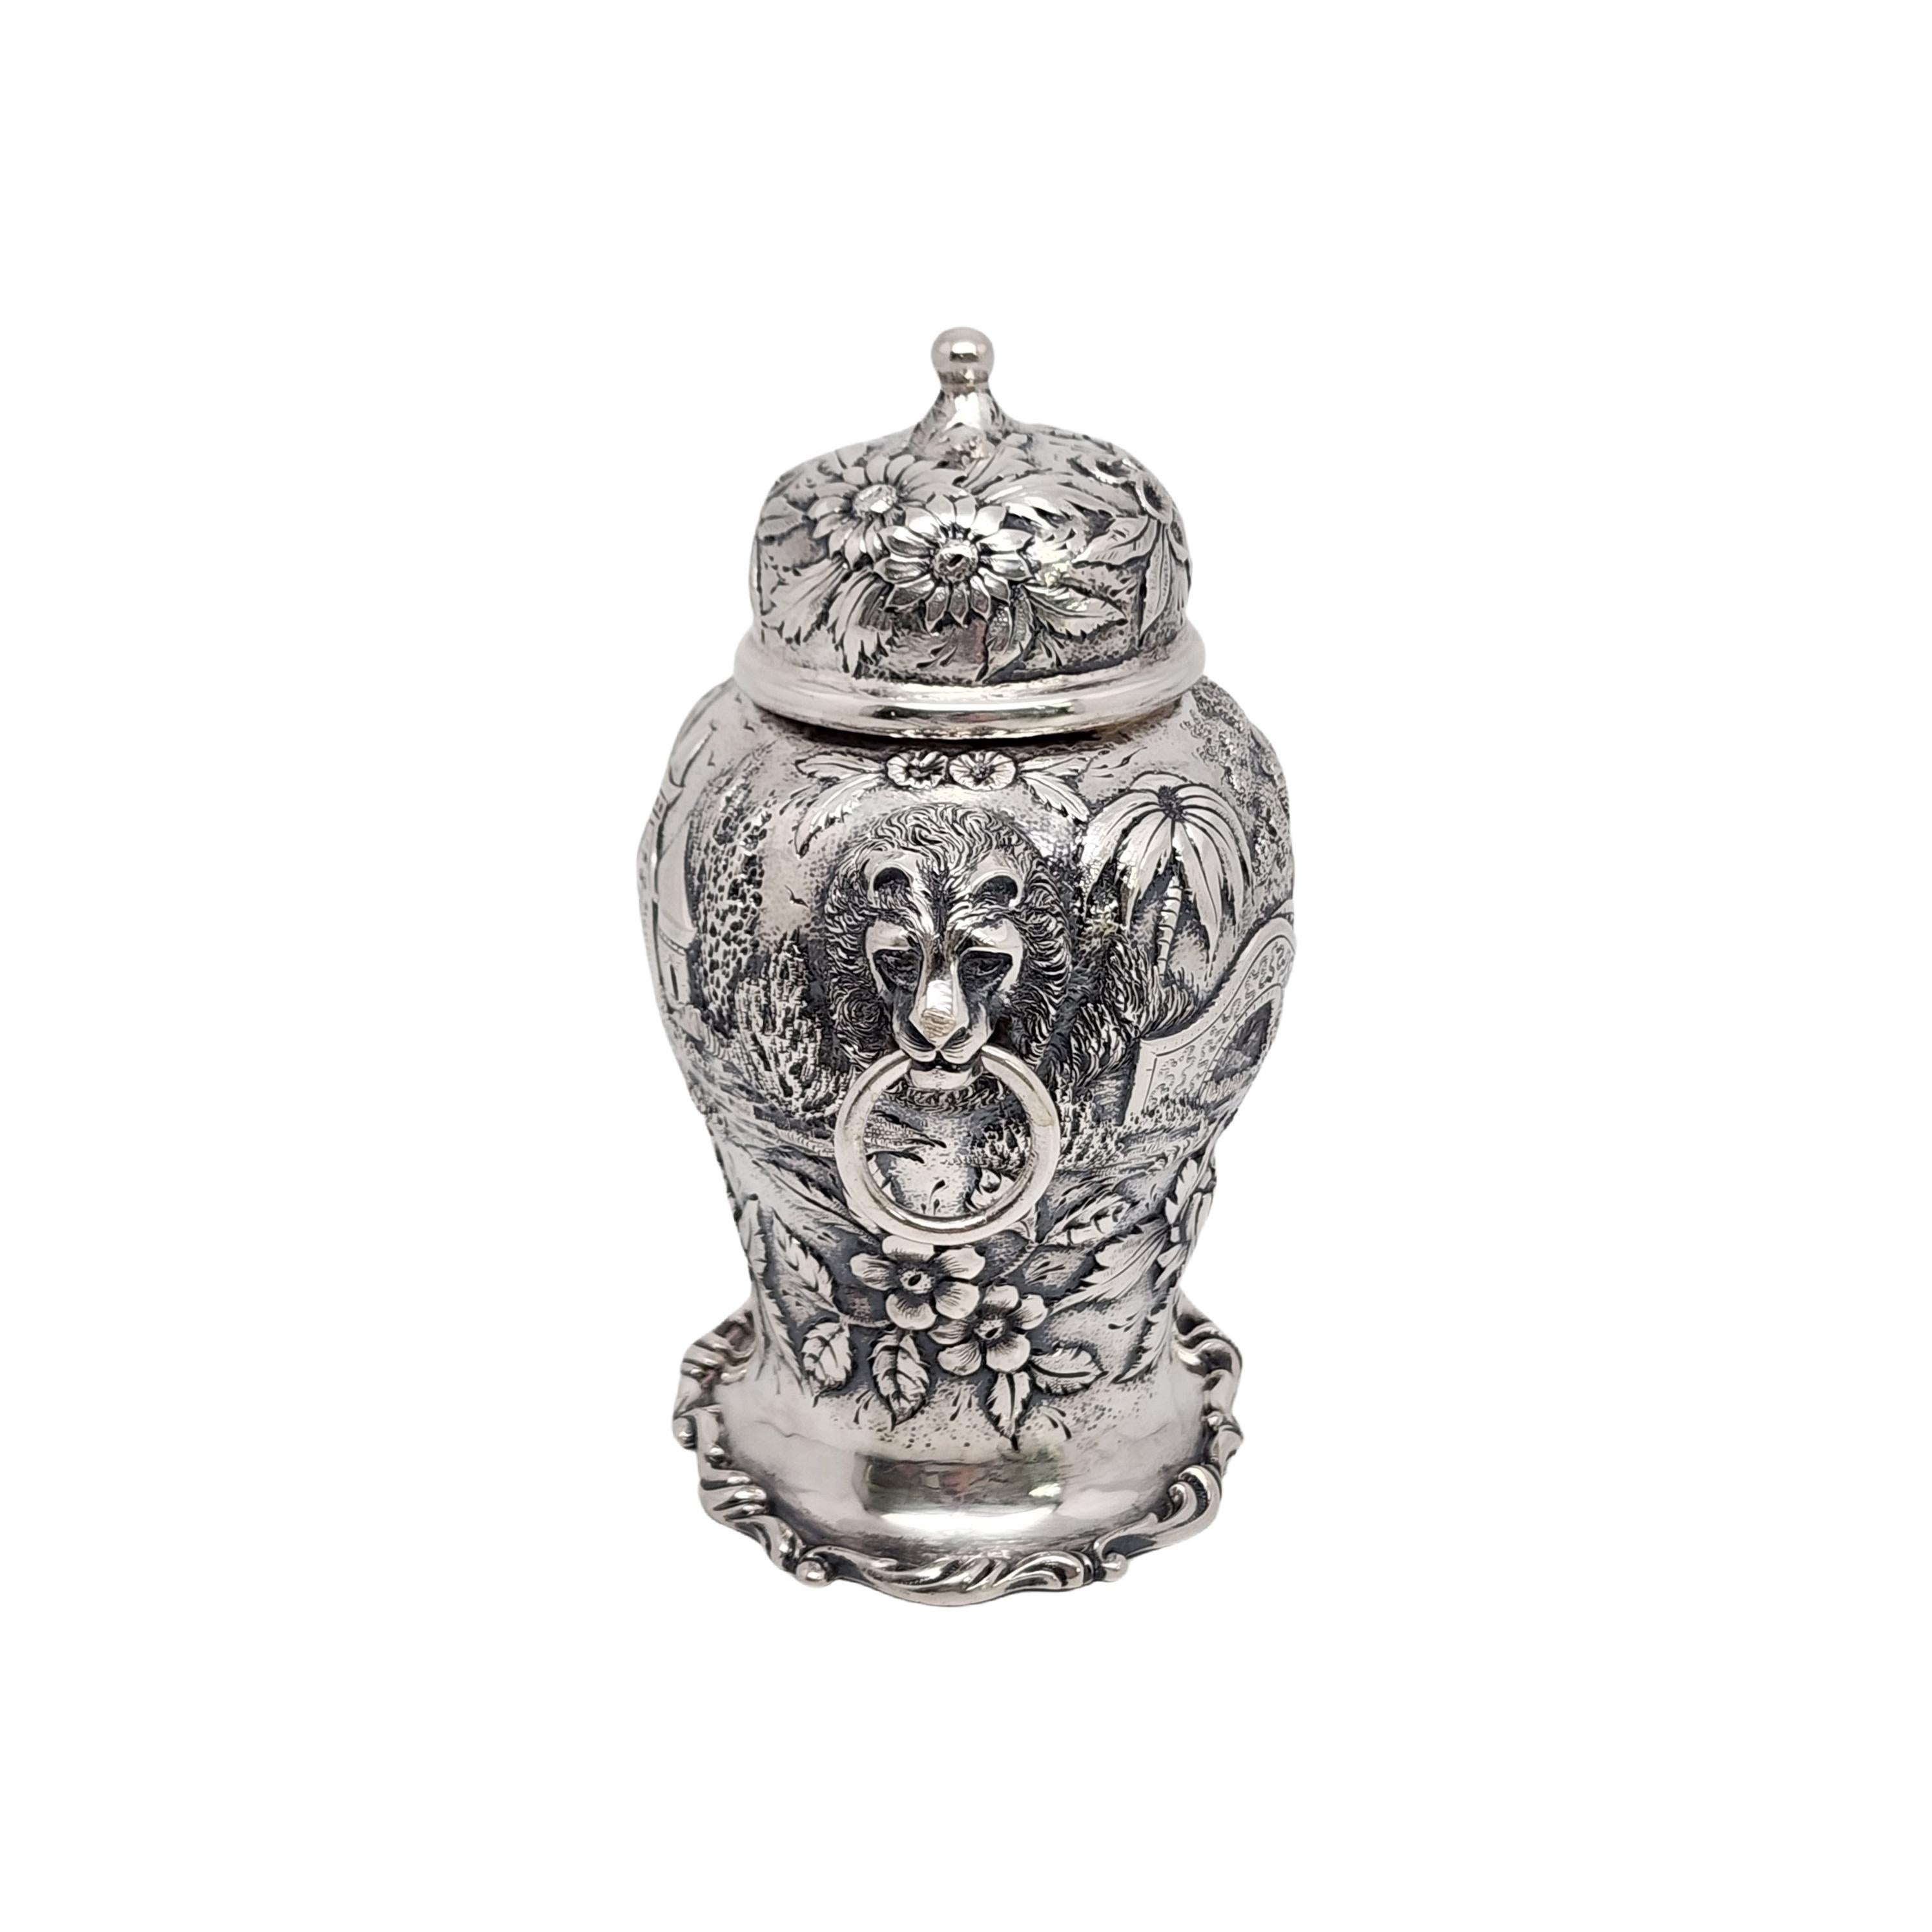 Antique repousse sterling silver tea caddy, pattern #19 by S. Kirk & Son.

No monogram

A beautifully ornate tea caddy in the renowned 